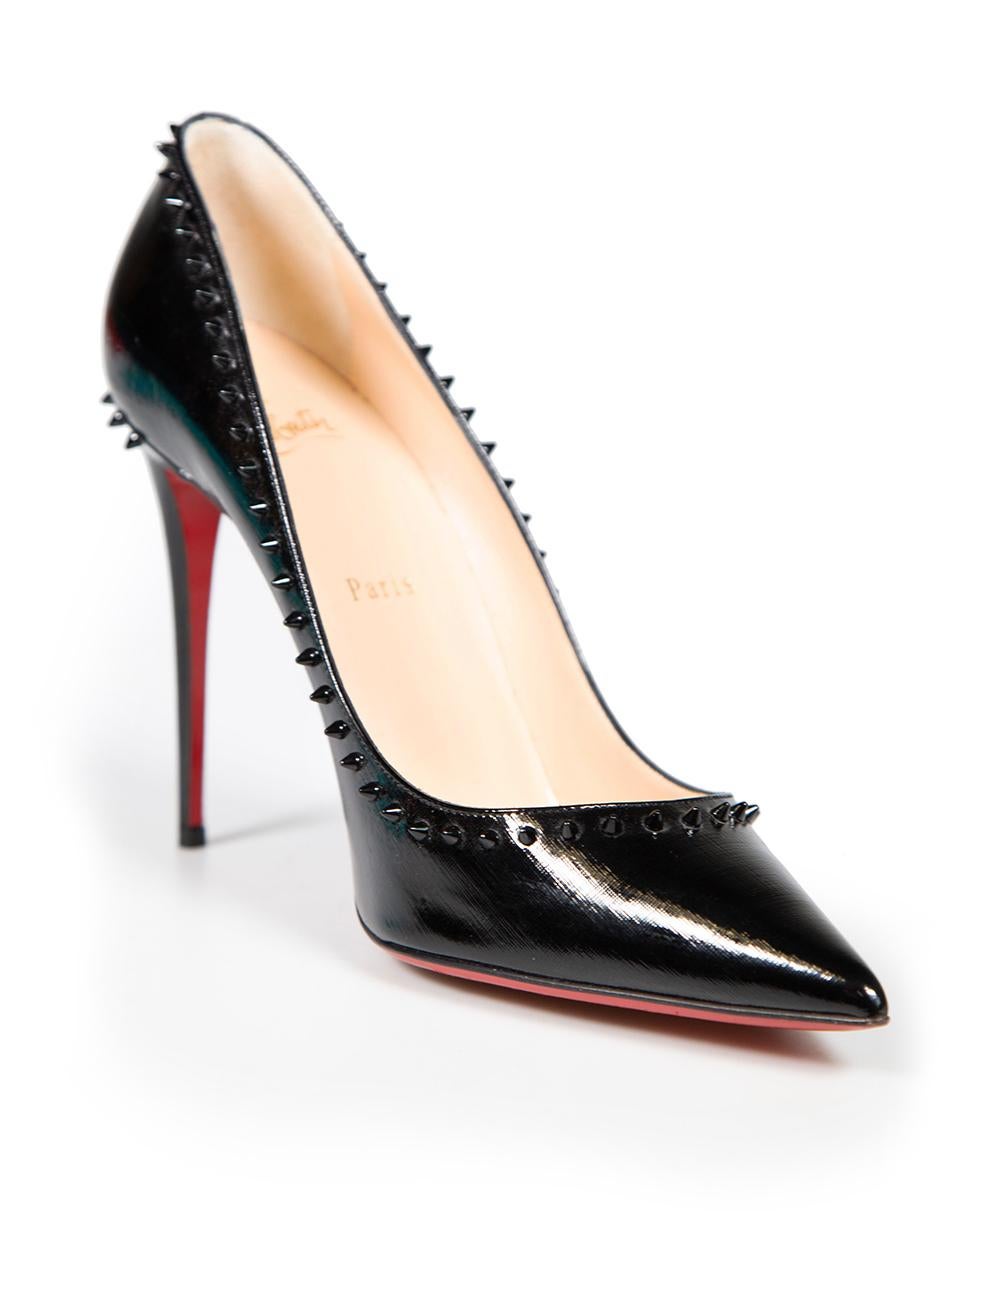 CONDITION is Very good. Minimal wear to heels is evident. Minimal wear to soles and scratches to the patent leather at the inside edge of heel on this used Christian Louboutin designer resale item. This item comes with original dust bag.
 
 
 
